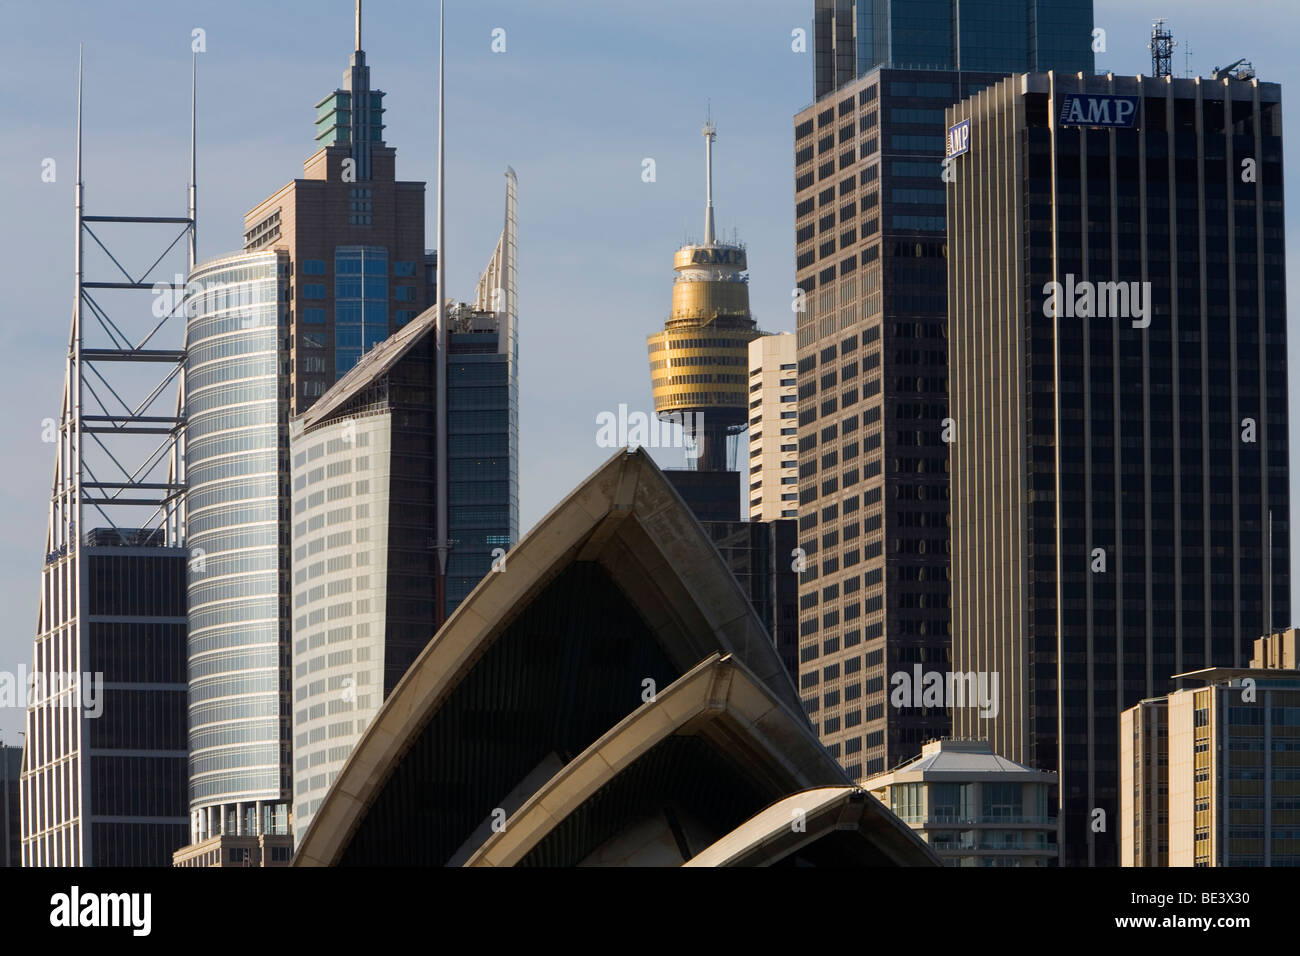 The iconic architecture of the Sydney Opera House and city skyline. Sydney, New South Wales, AUSTRALIA Stock Photo